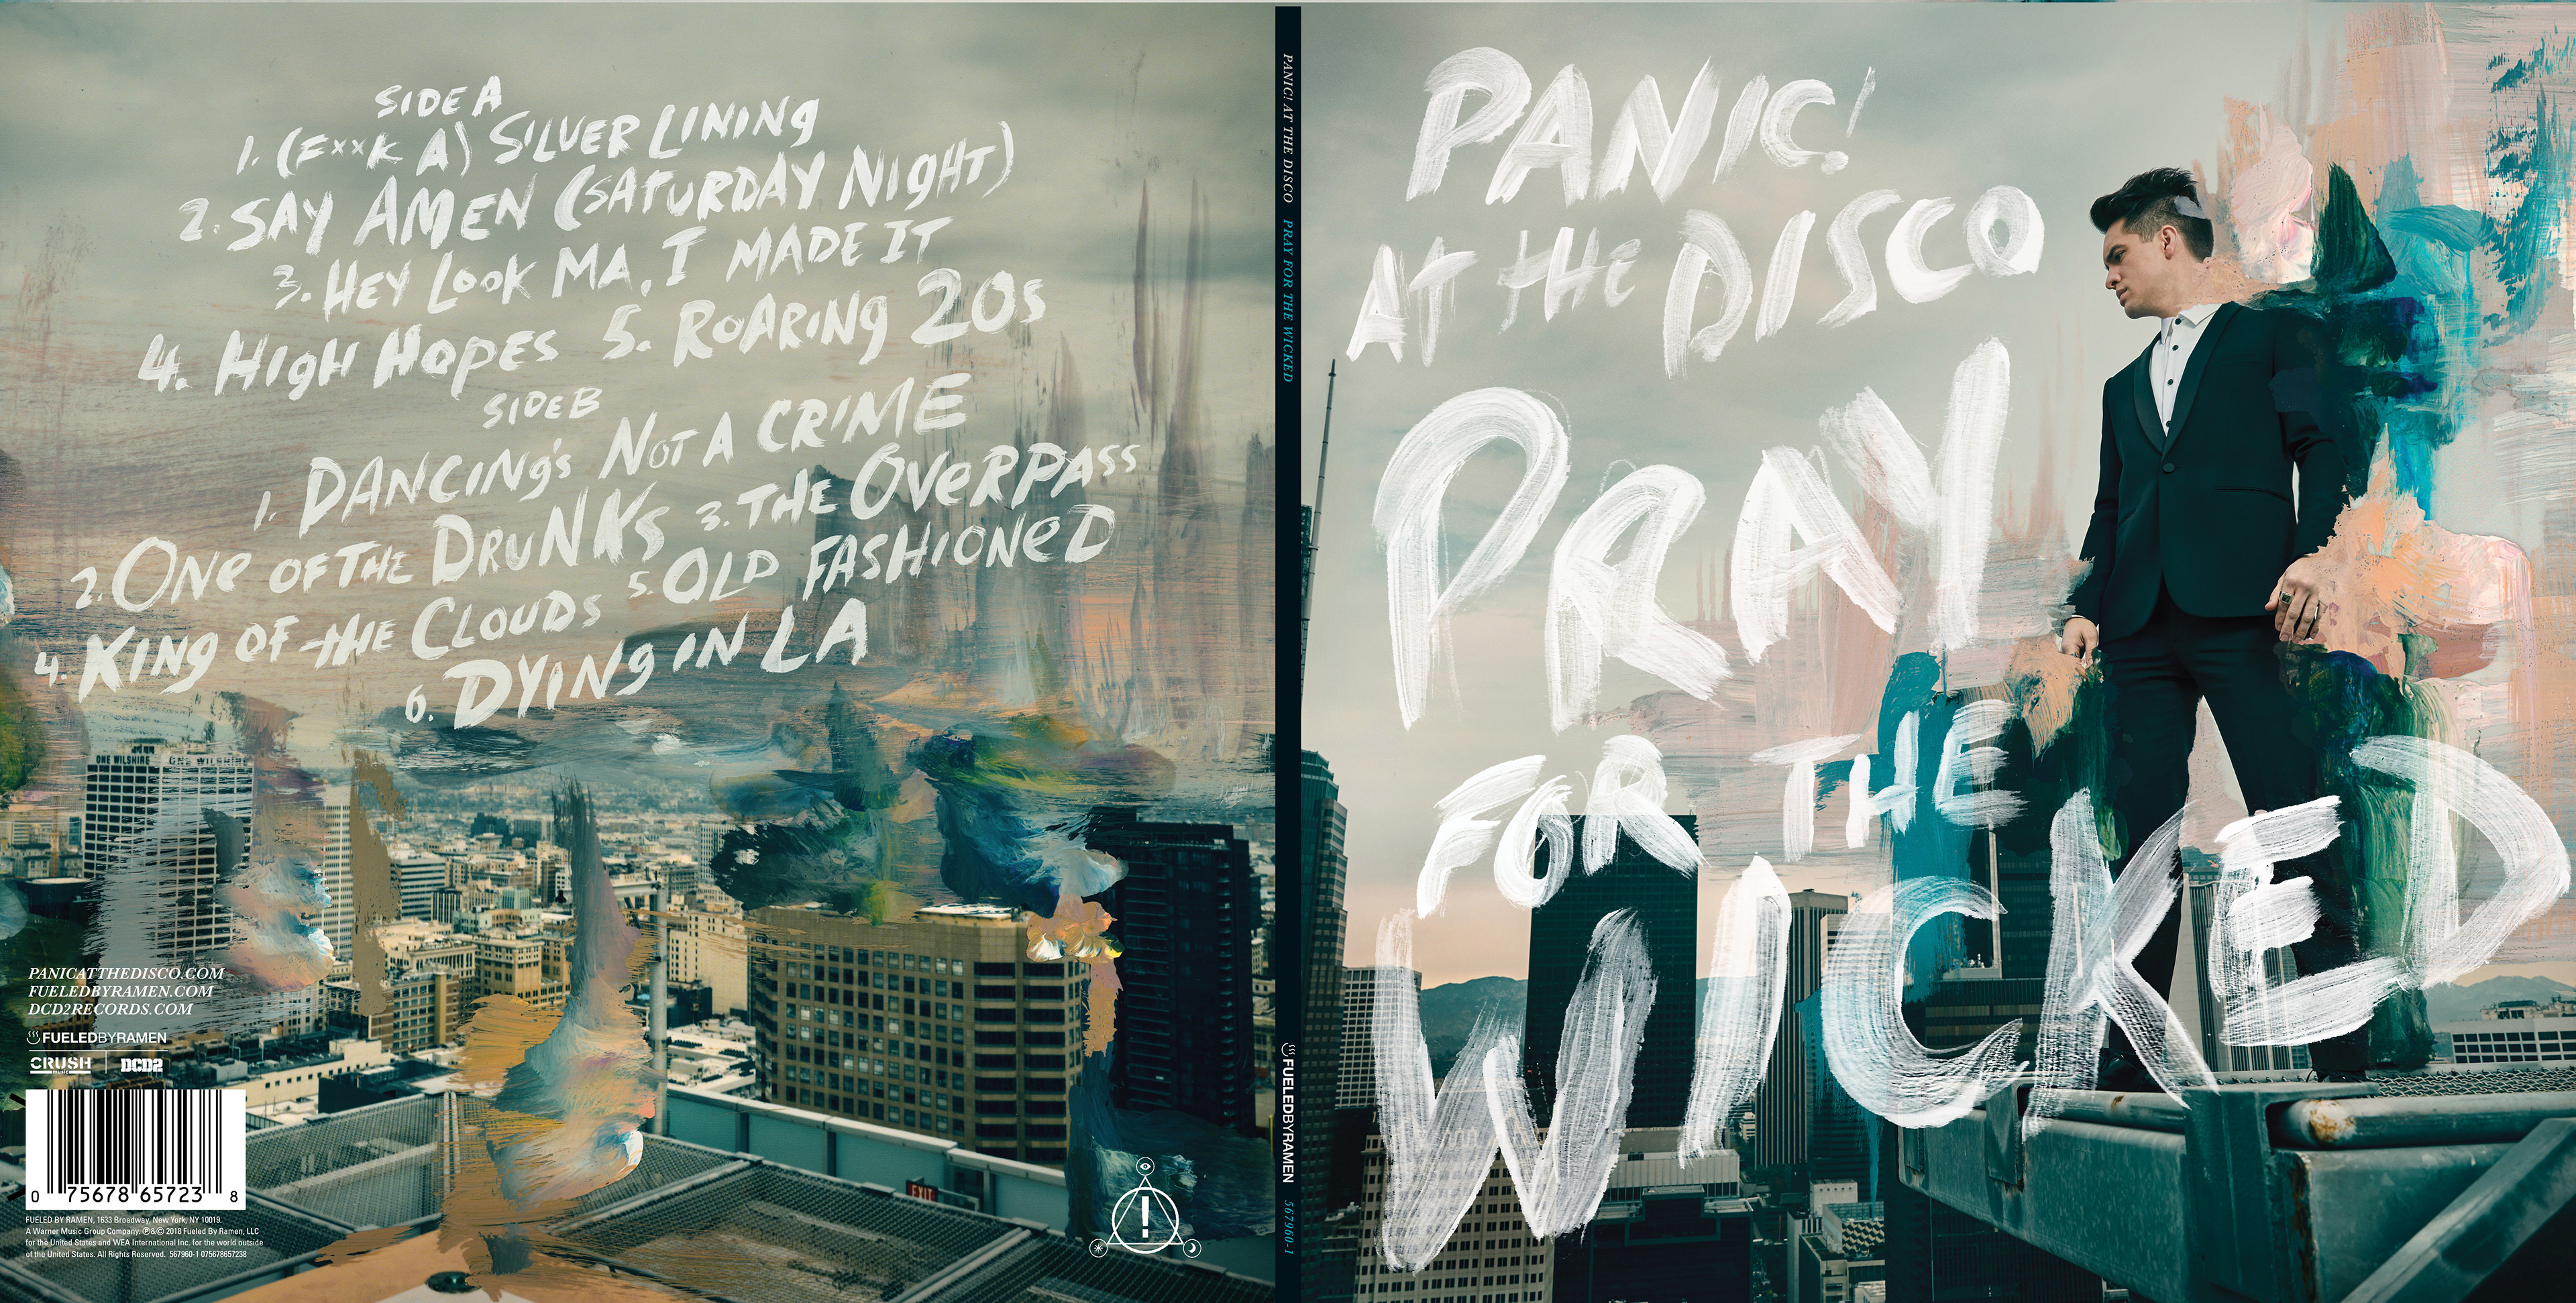 The Visual Strategist Panic! At The Disco